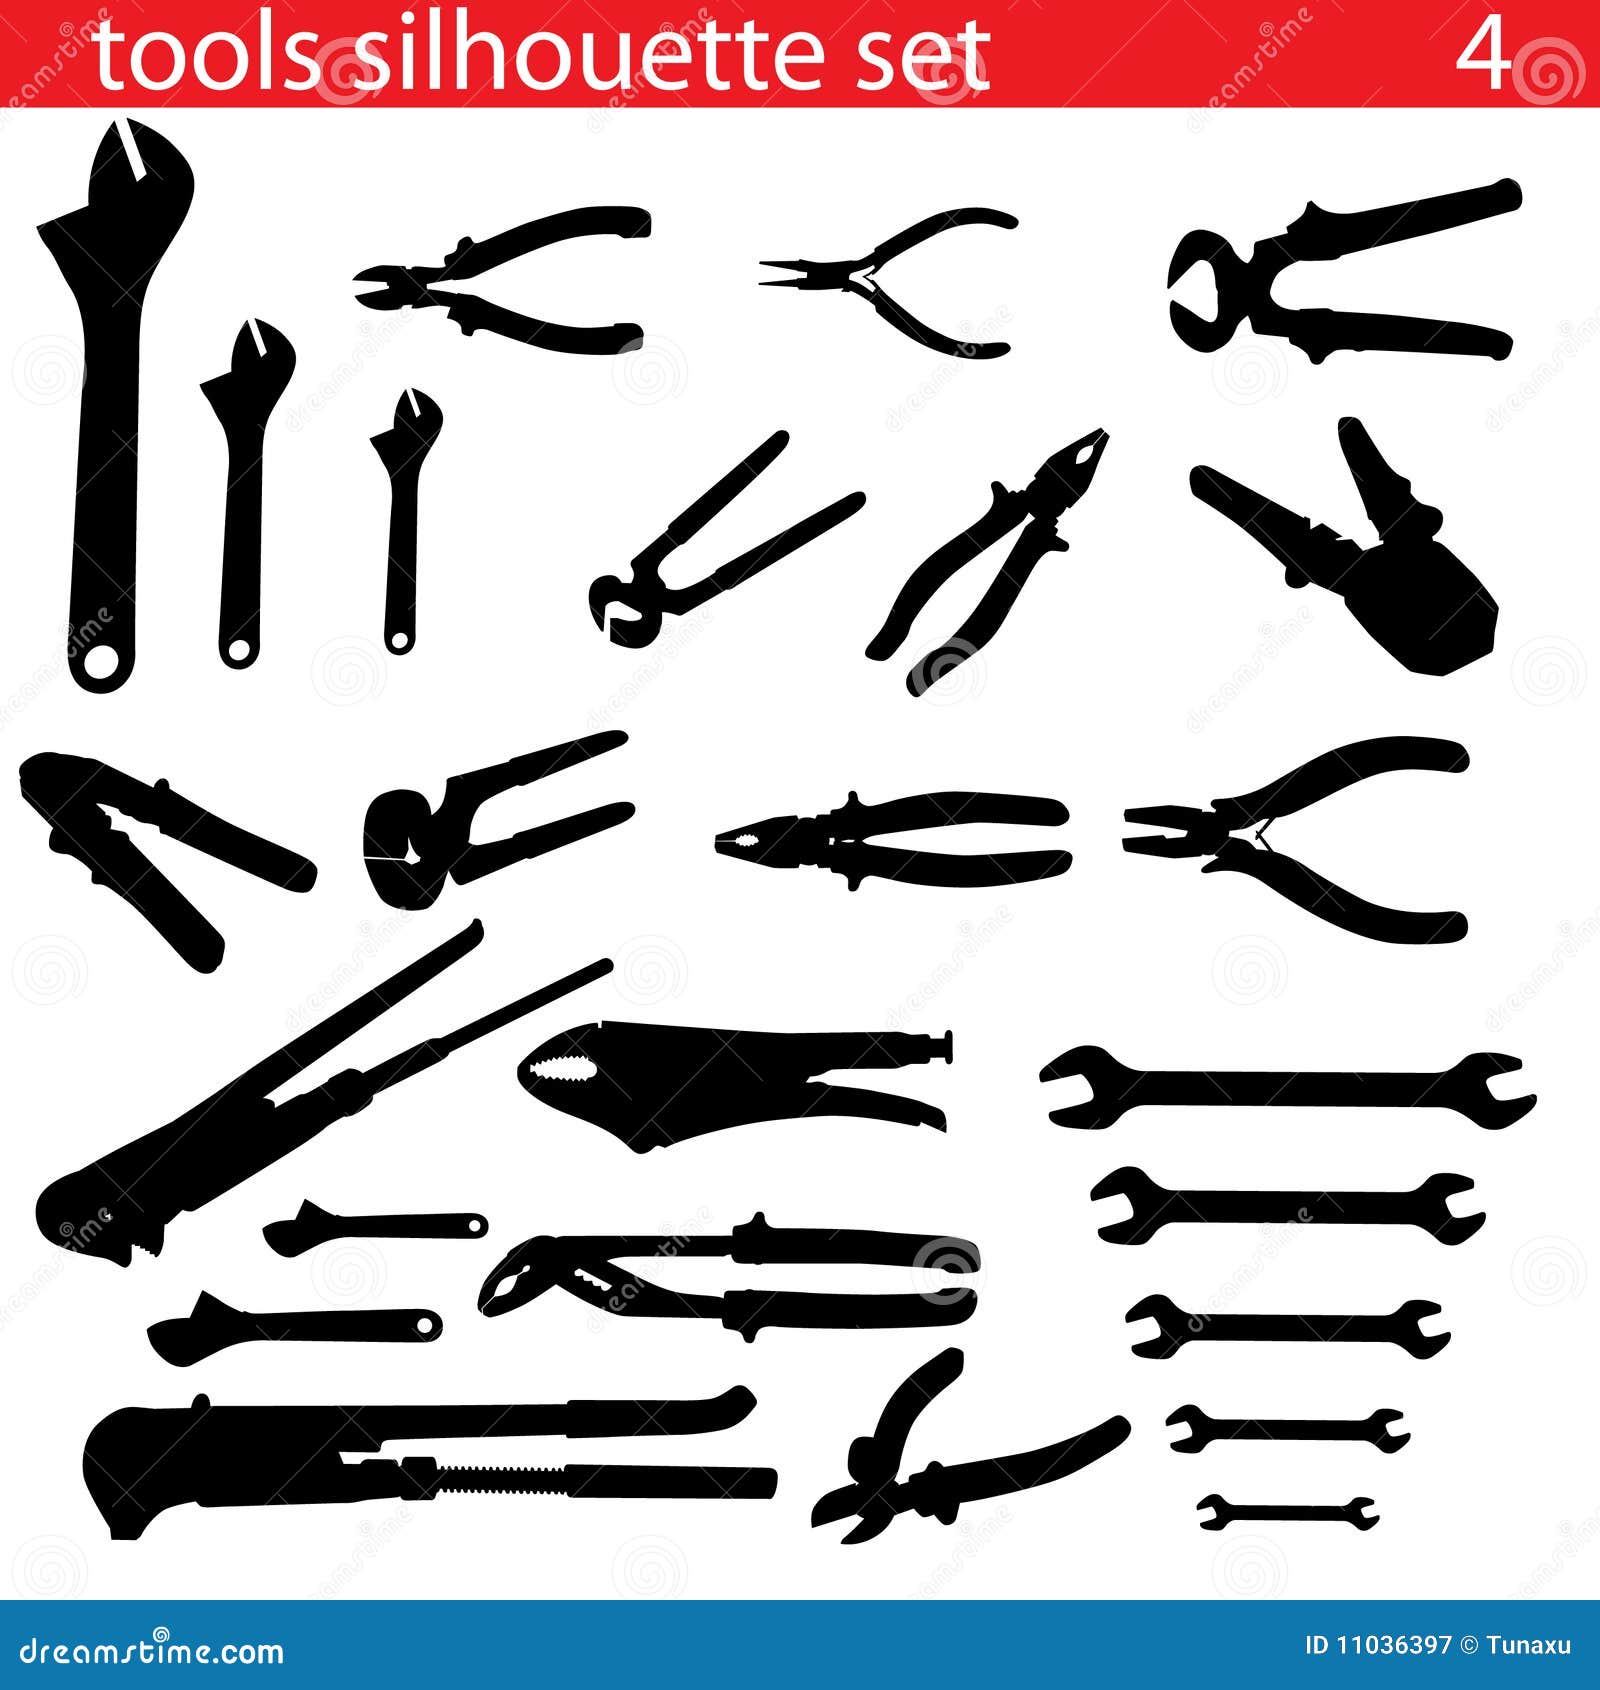 Vector Tools Silhouette Set Royalty Free Stock Photography ...